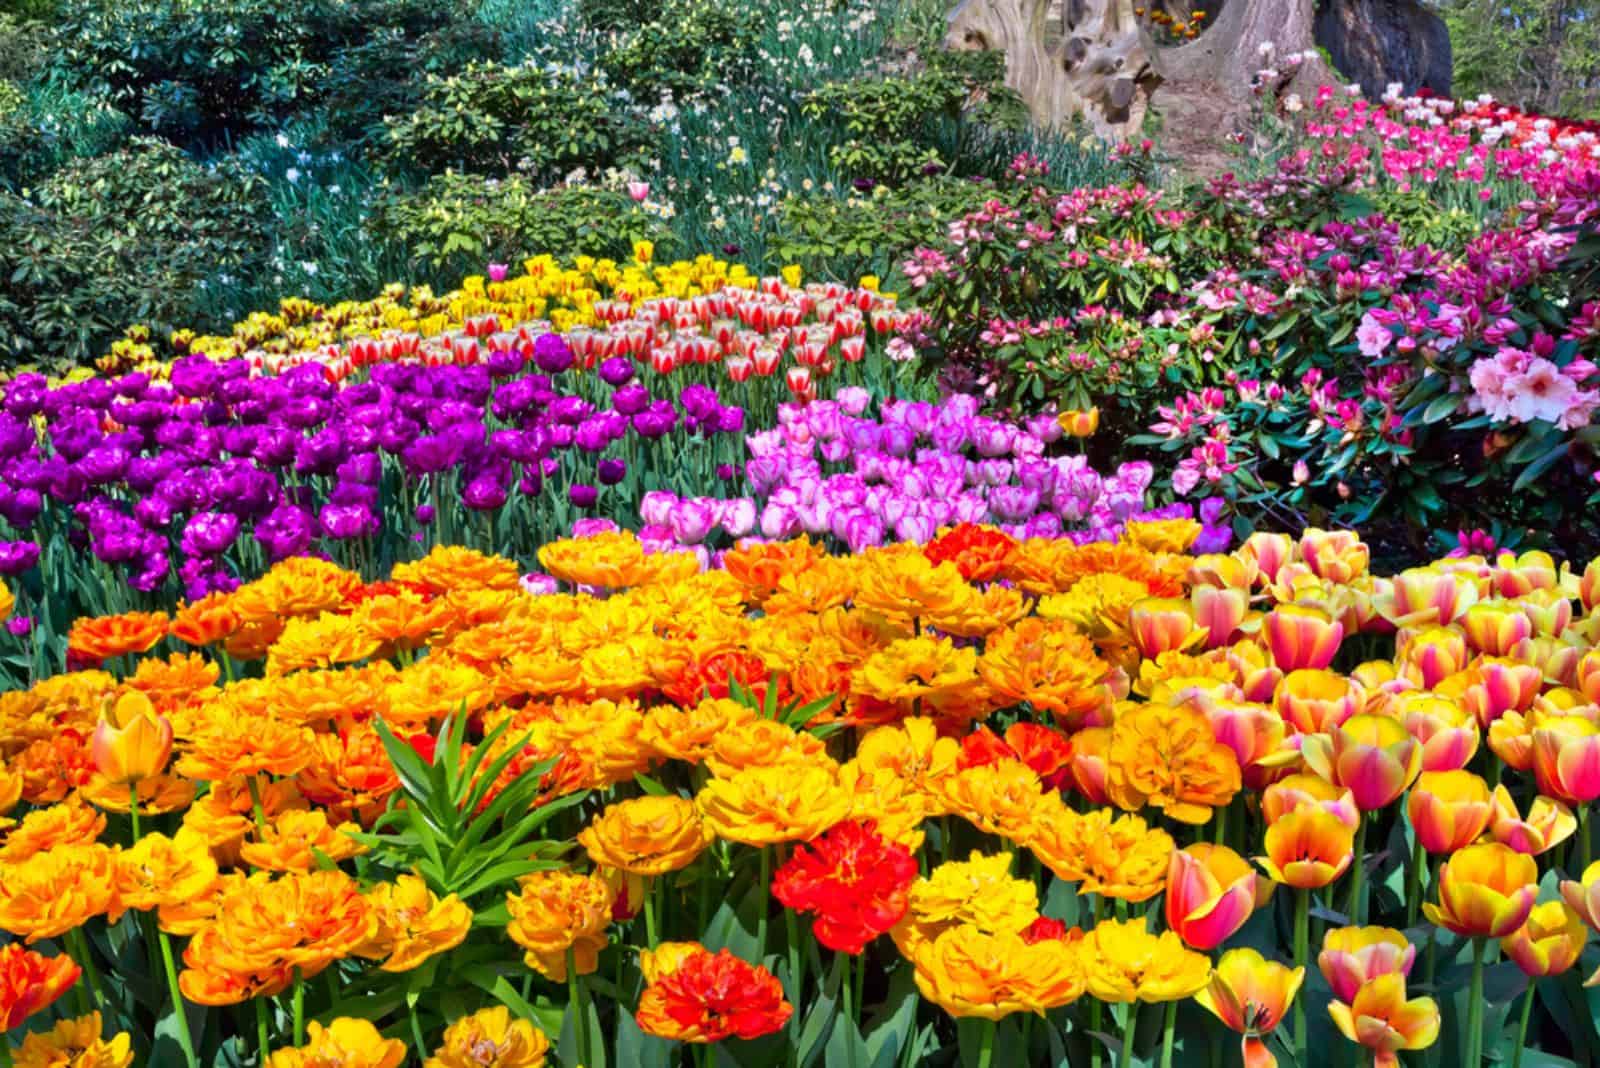 58 Colorful Plants And Flowers For A Stunning Garden Display